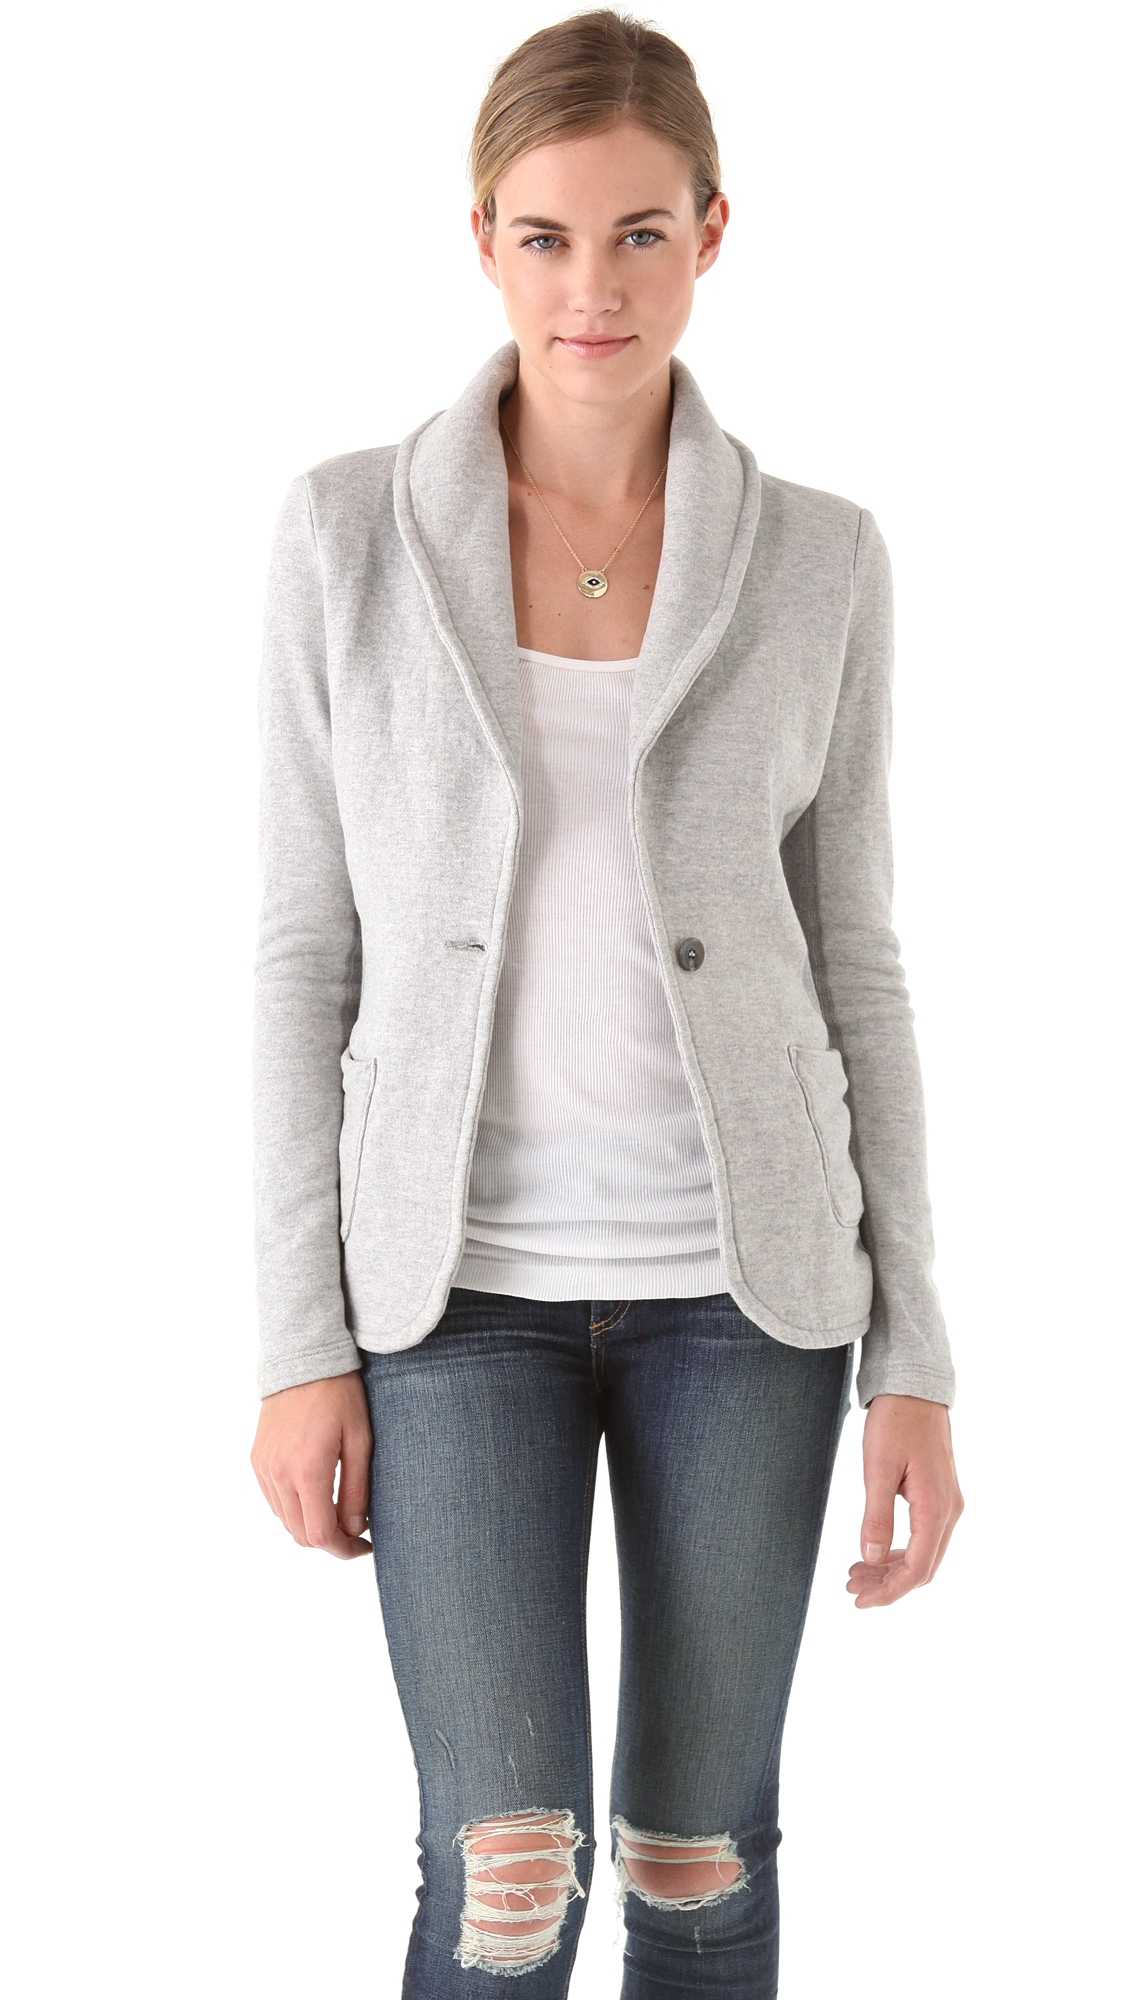 Lyst - James Perse Old School Shawl Collar Jacket in Gray